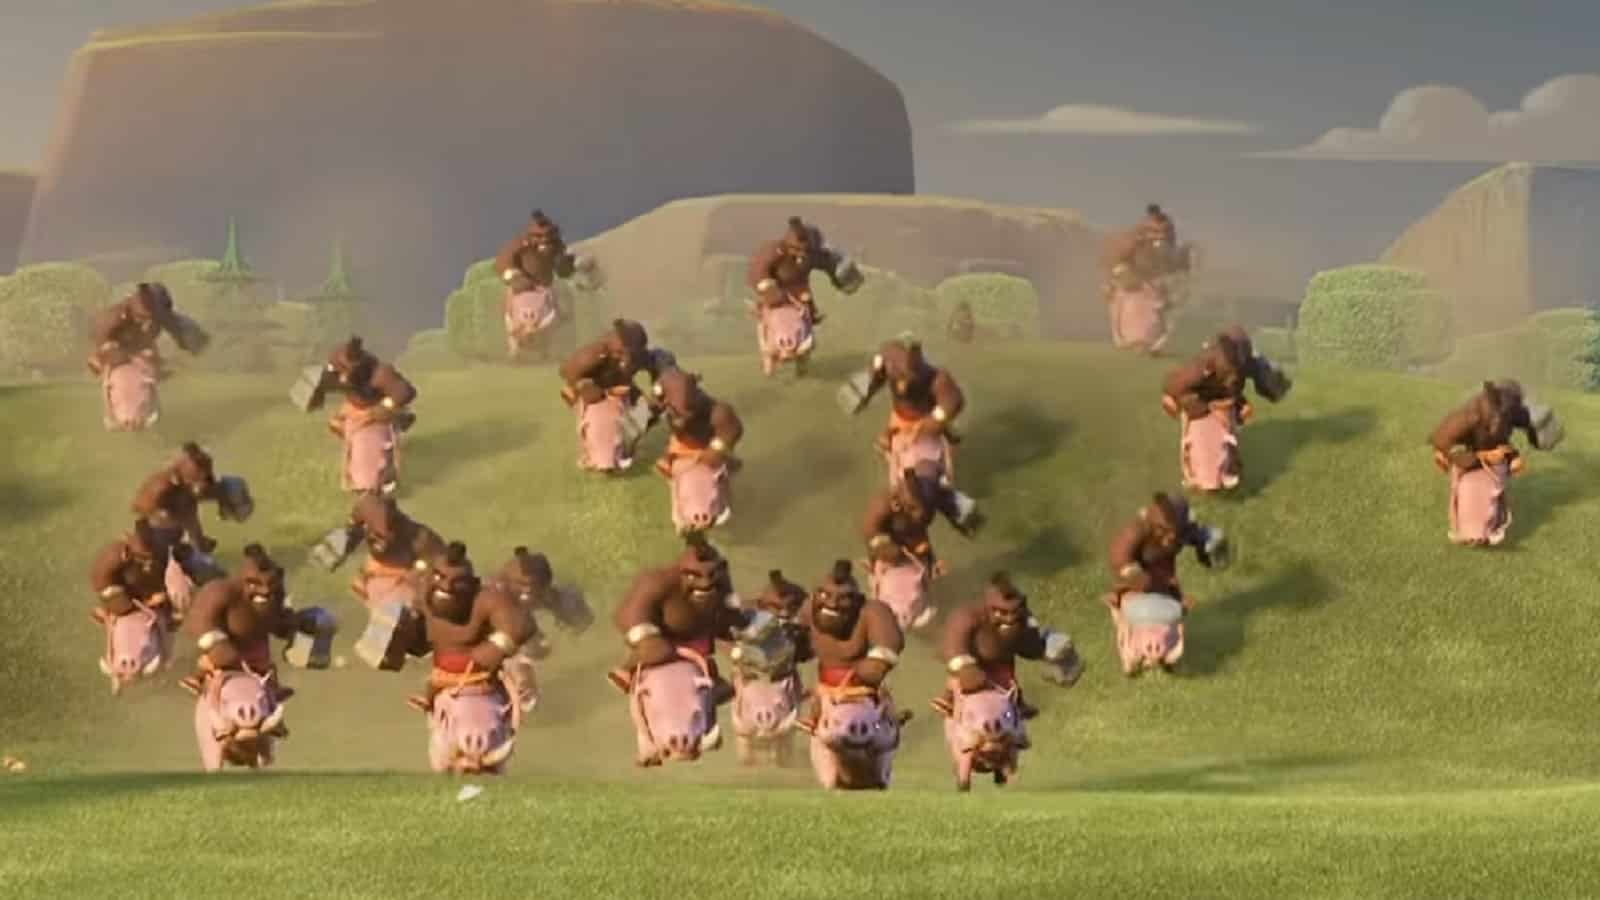 screenshot from hog riders cinematic for clash royale